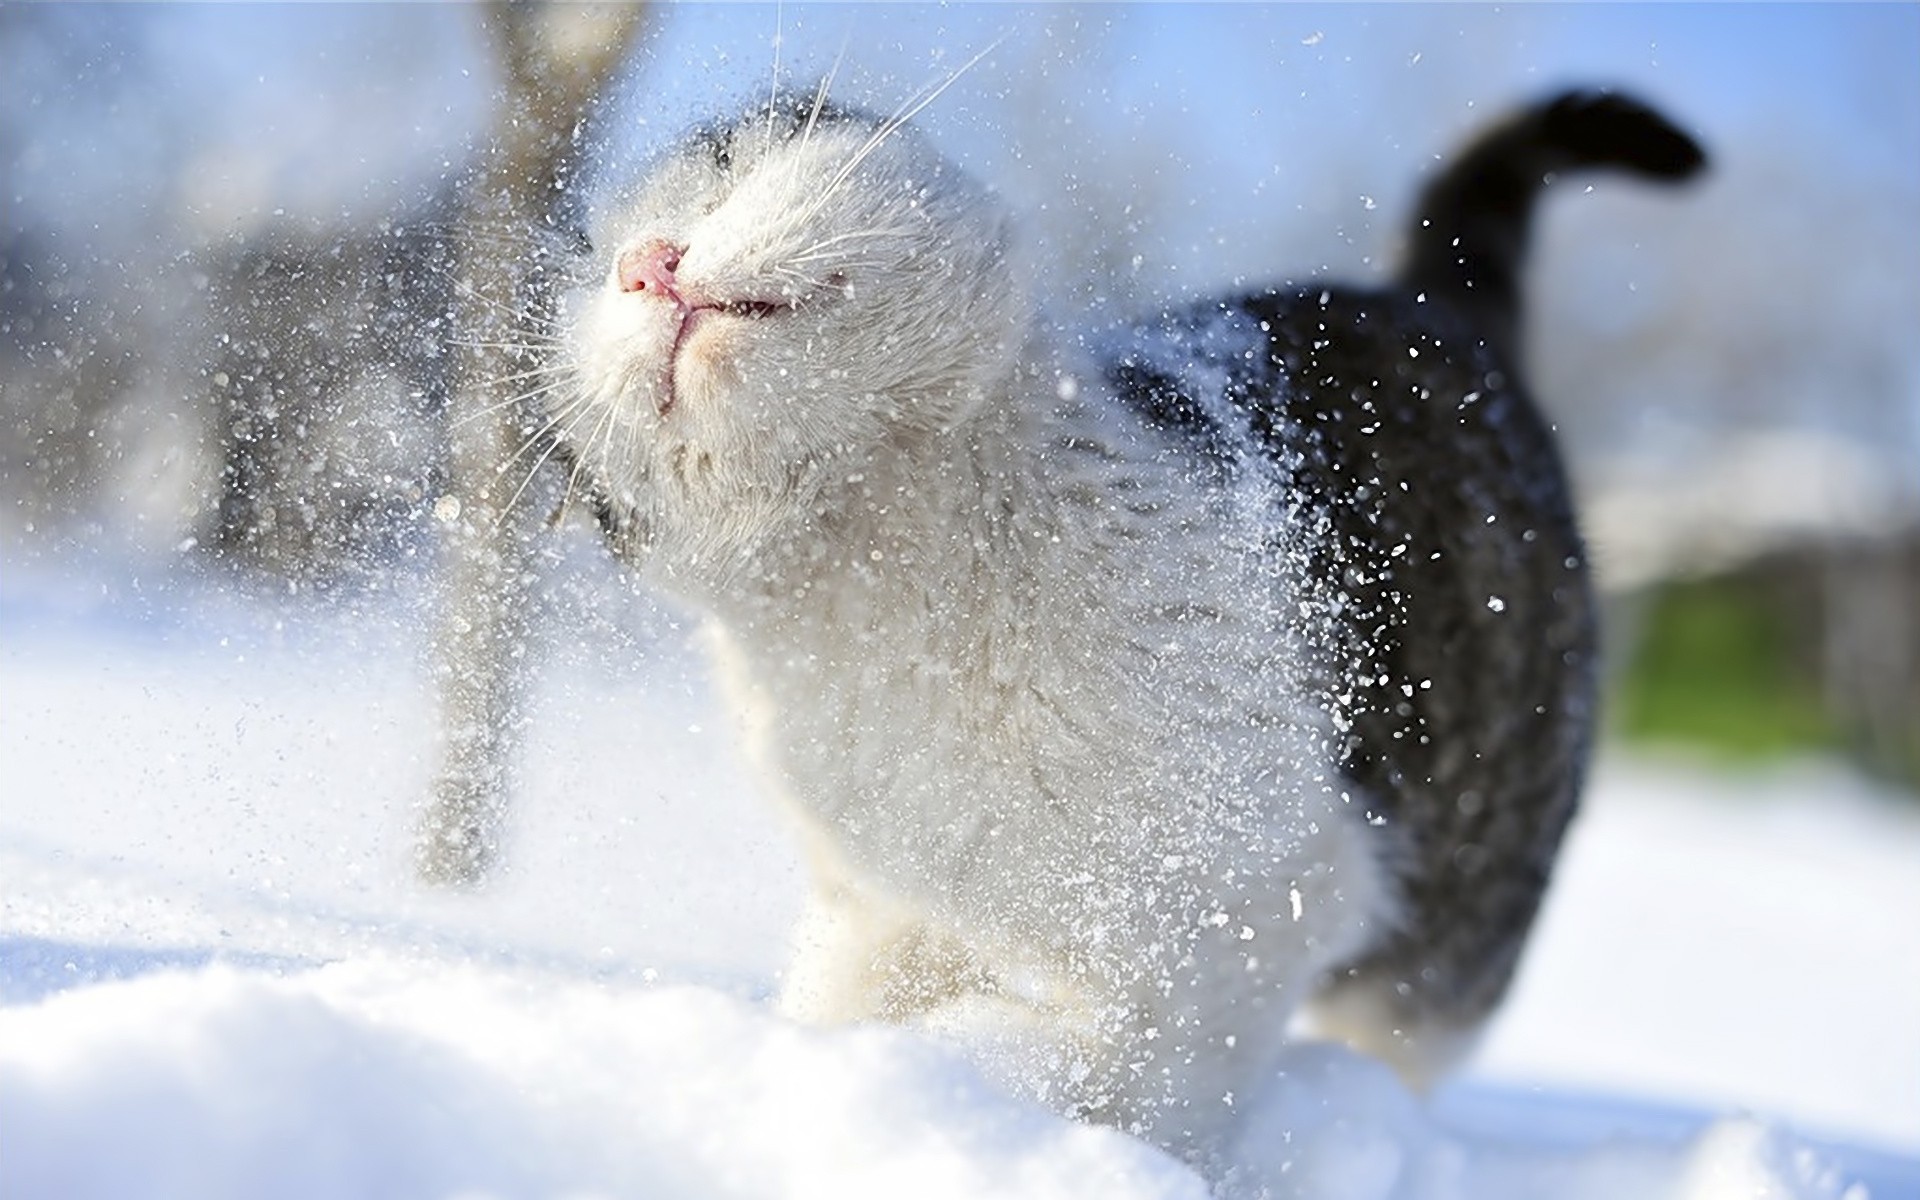 Animals in the snow